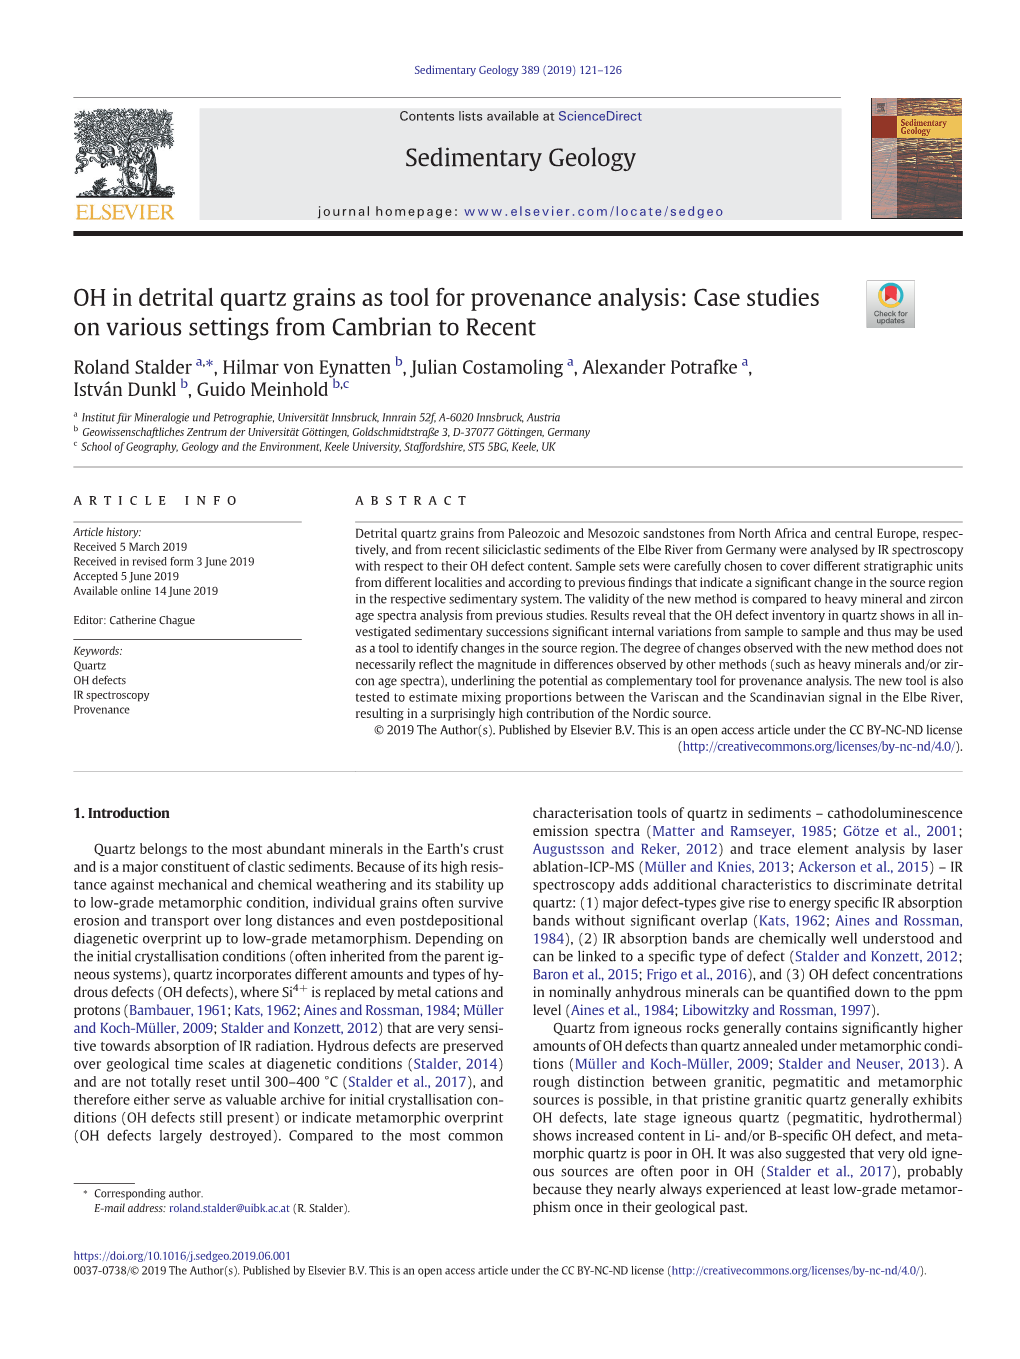 OH in Detrital Quartz Grains As Tool for Provenance Analysis: Case Studies on Various Settings from Cambrian to Recent